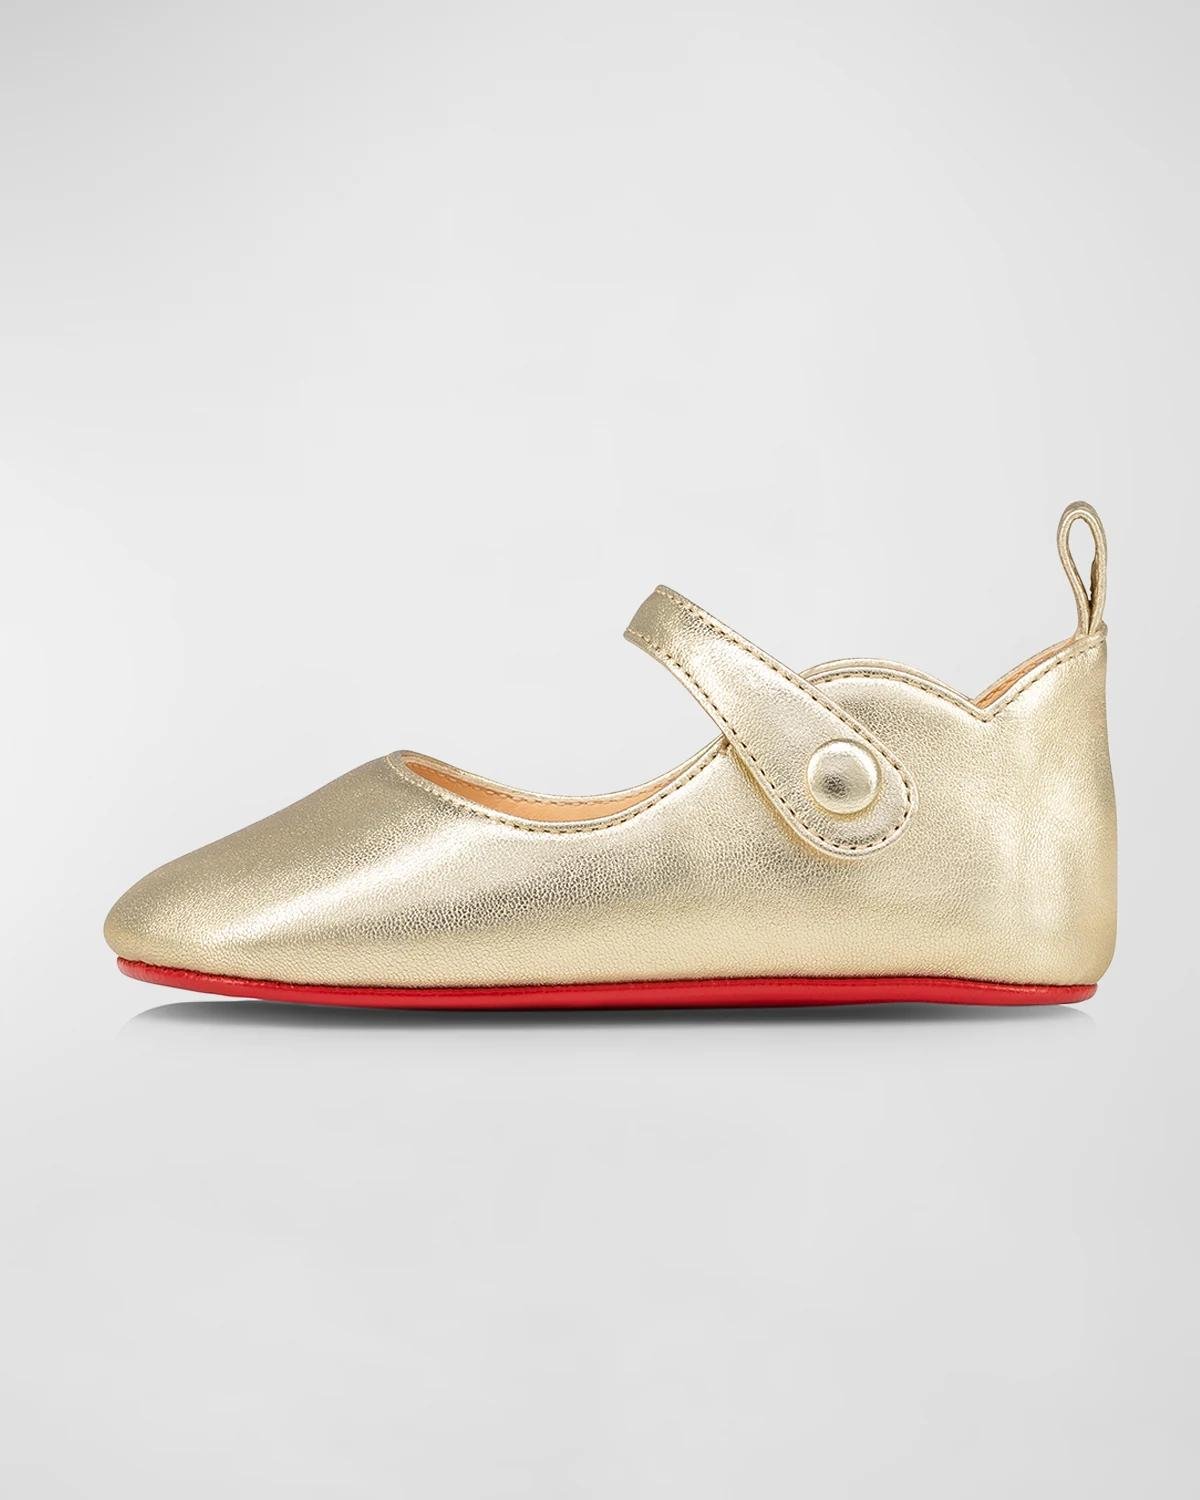 Girl's Love Chick Metallic Leather Ballerina Shoes, Baby by CHRISTIAN LOUBOUTIN